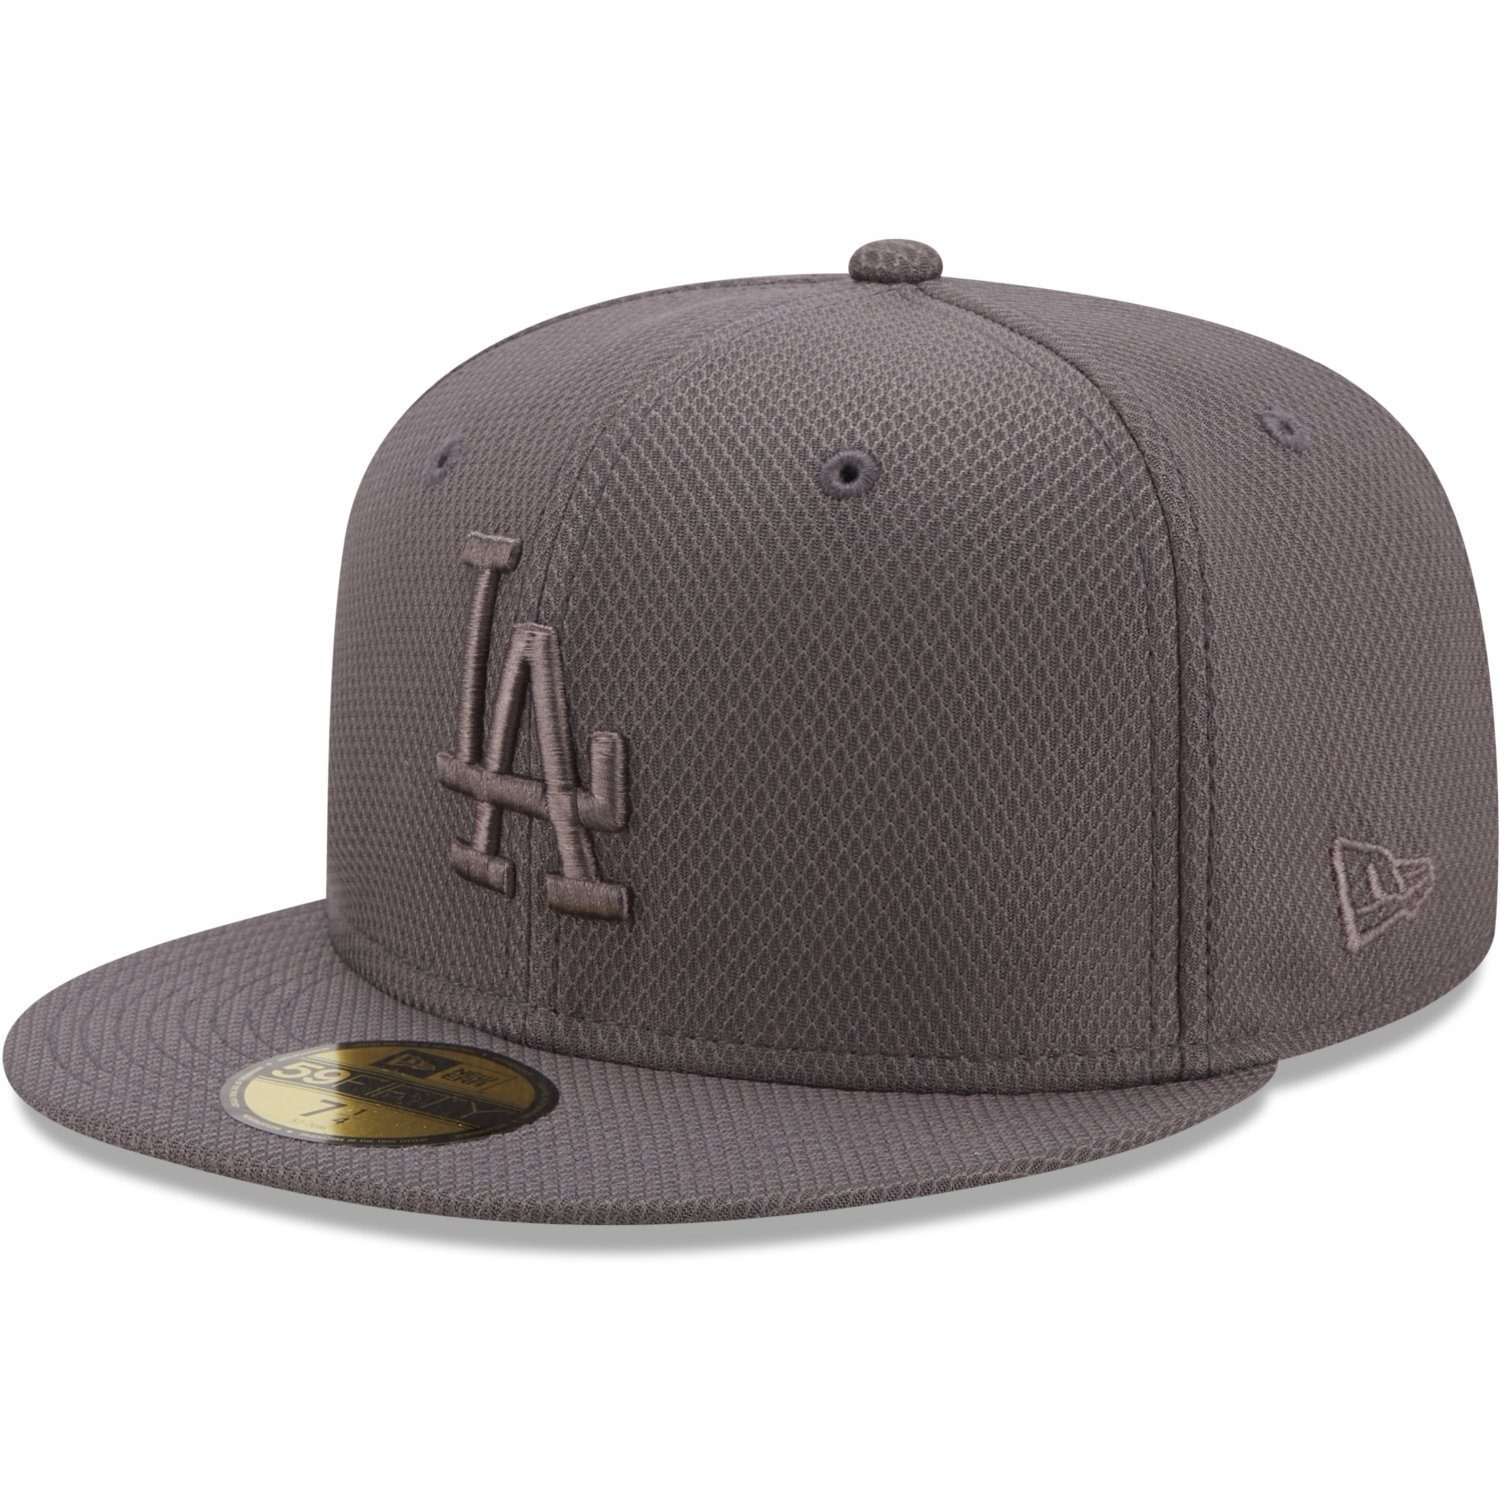 New Era Cap DIAMOND Angeles Los 59Fifty Fitted Dodgers